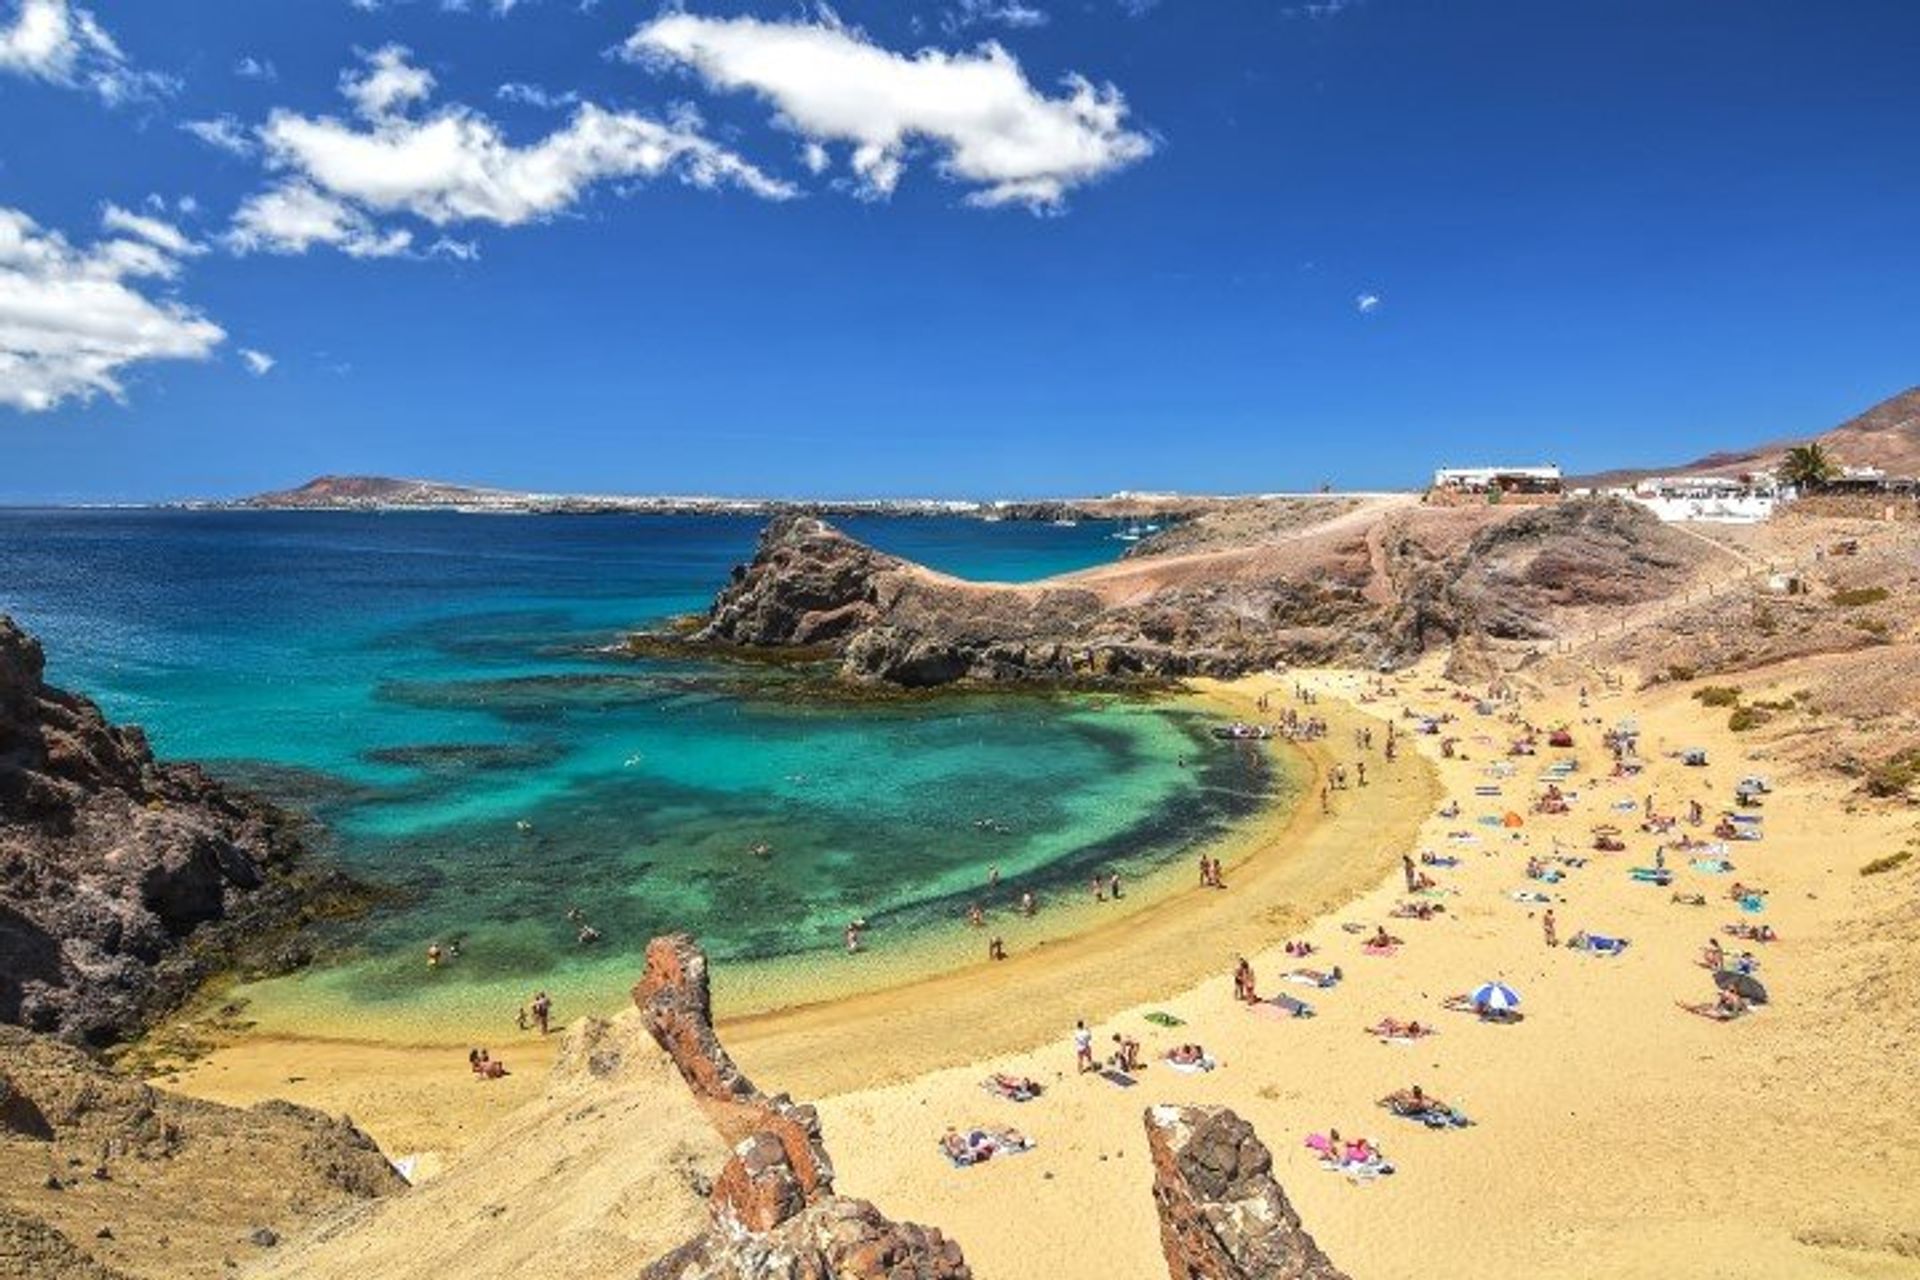 Papagayo beach is a crescent of fine white sand, surrounded by Los Ajaches Natural Park